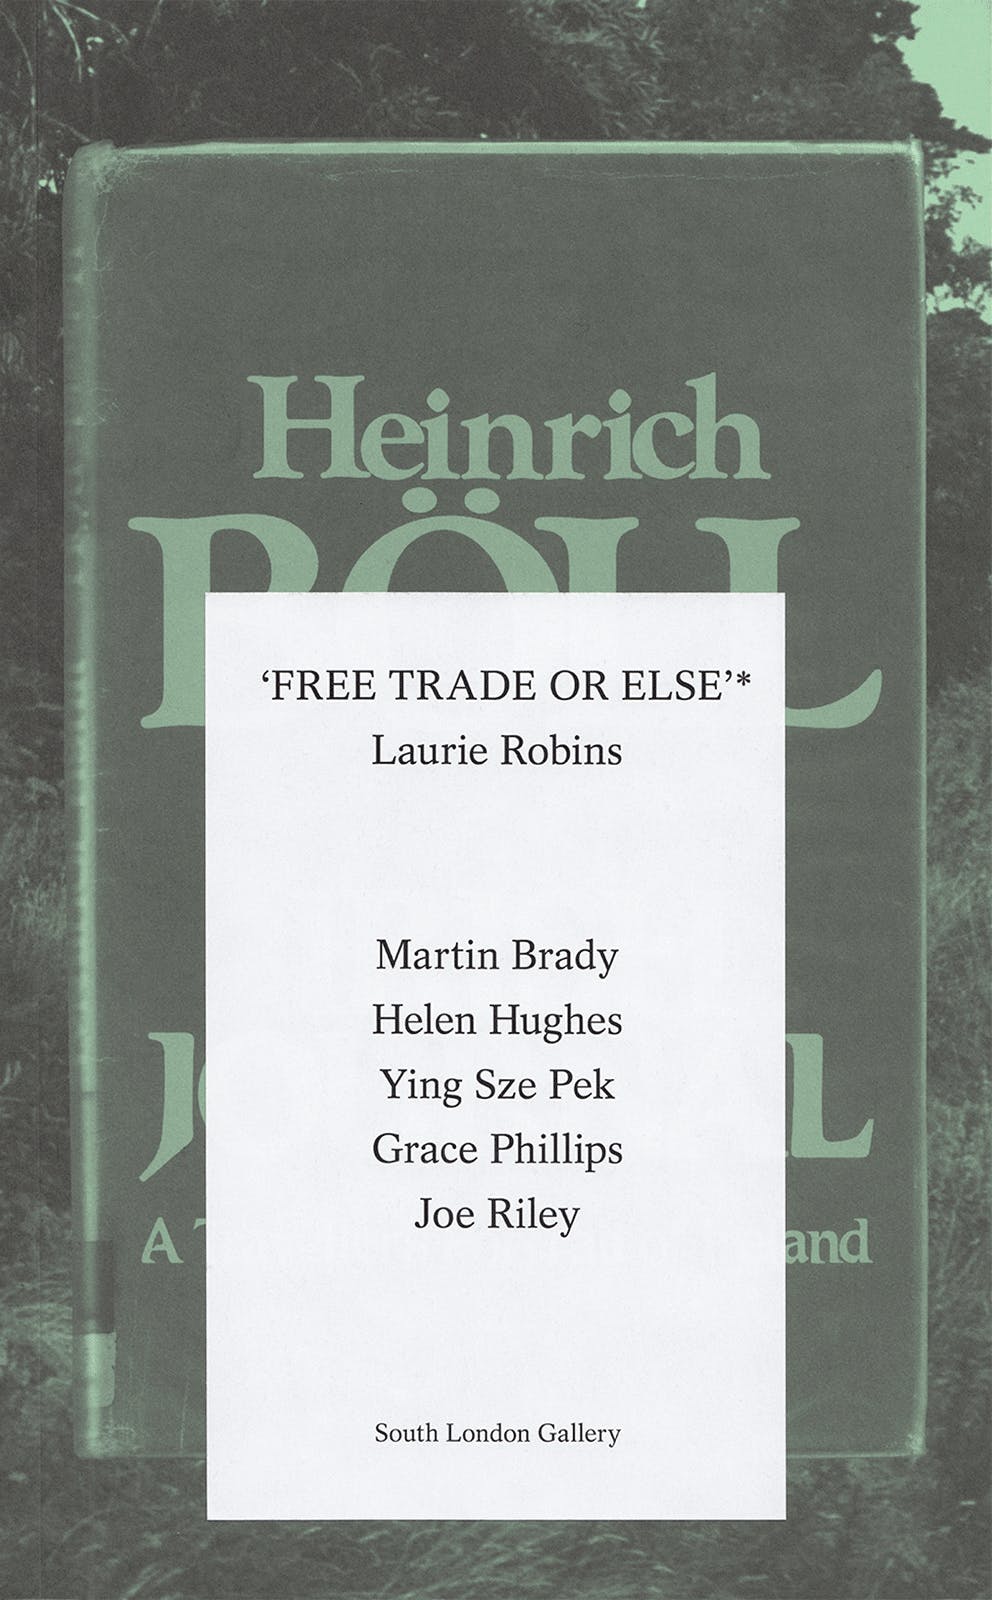 Laurie Robins, ‘FREE TRADE OR ELSE’*, South London Gallery, Publication, Graphic Design by Wolfe Hall